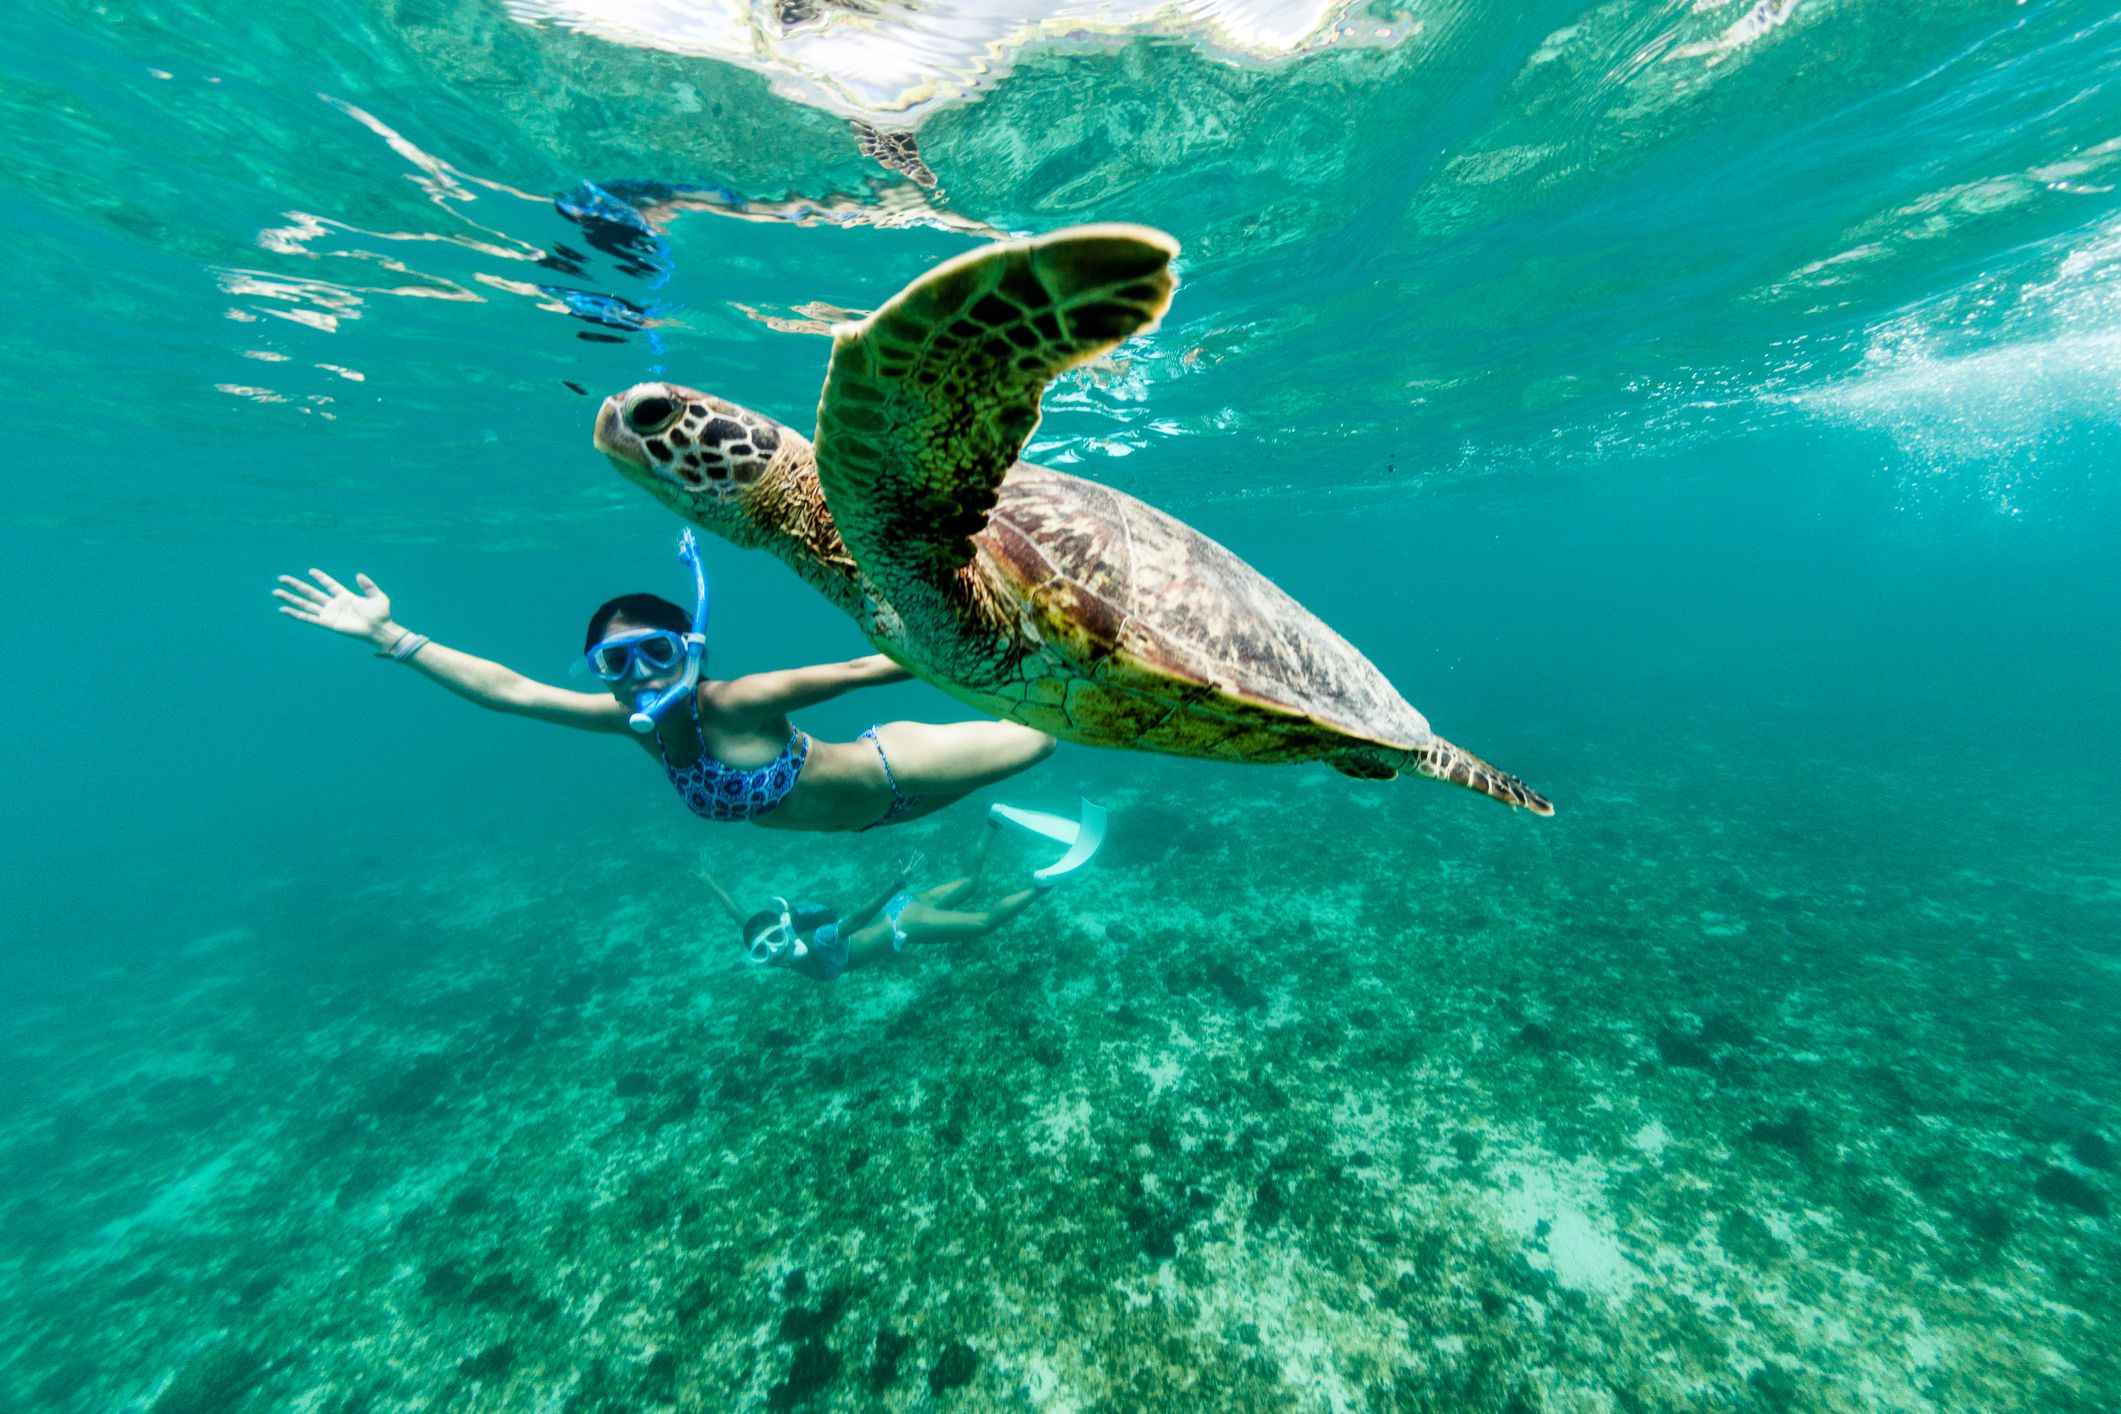 <p>One of the top 10 things to do in Maui is snorkeling with sea turtles. While there are many places you can see them, sometimes the number of tourists scares them away at the more popular beaches. However, at sleepy Honokeana Bay, you’re more likely to bump into one.</p><p>This bay doesn’t have a sandy beach, so wear water shoes; you’ll likely have to climb over some possibly sharp lava rock to get into and out of the water. Bring an underwater camera to get a shot of these graceful creatures, but remember: Don’t touch them!</p>